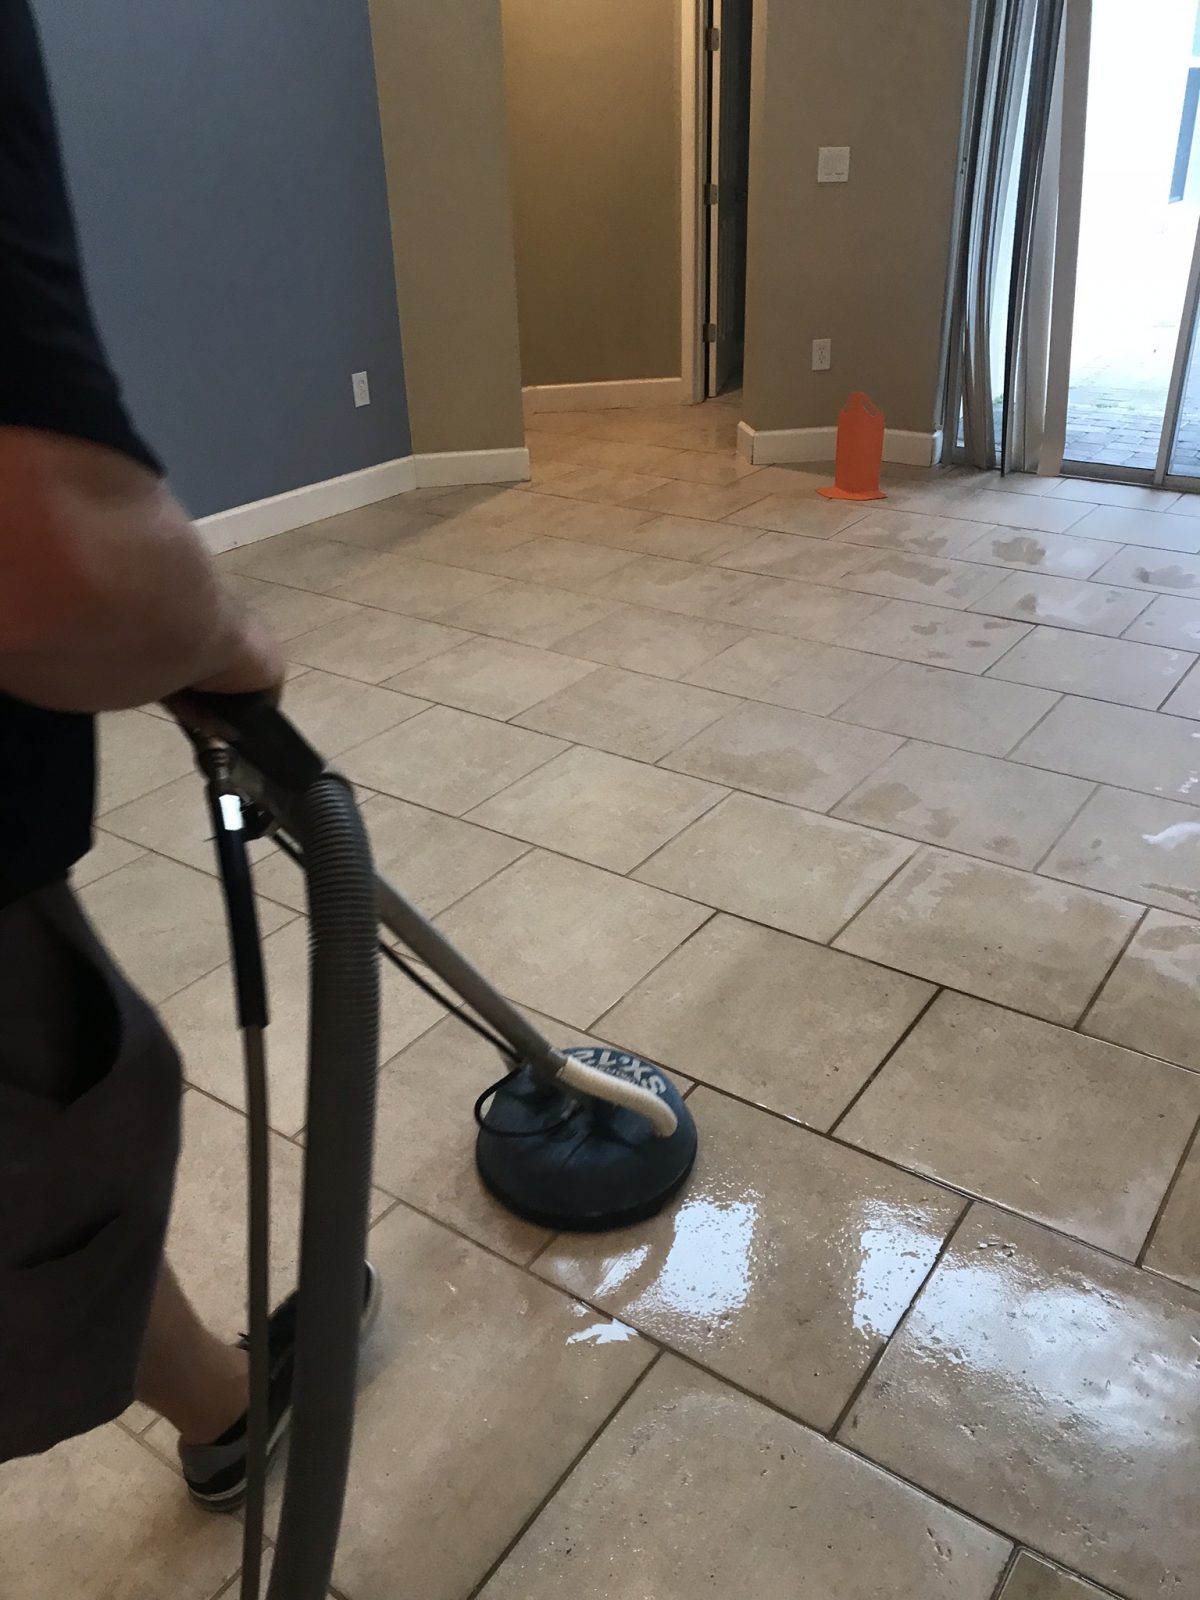 Professional Tile & Grout Cleaning Oldsmar Florida by Howards Cleaning Service